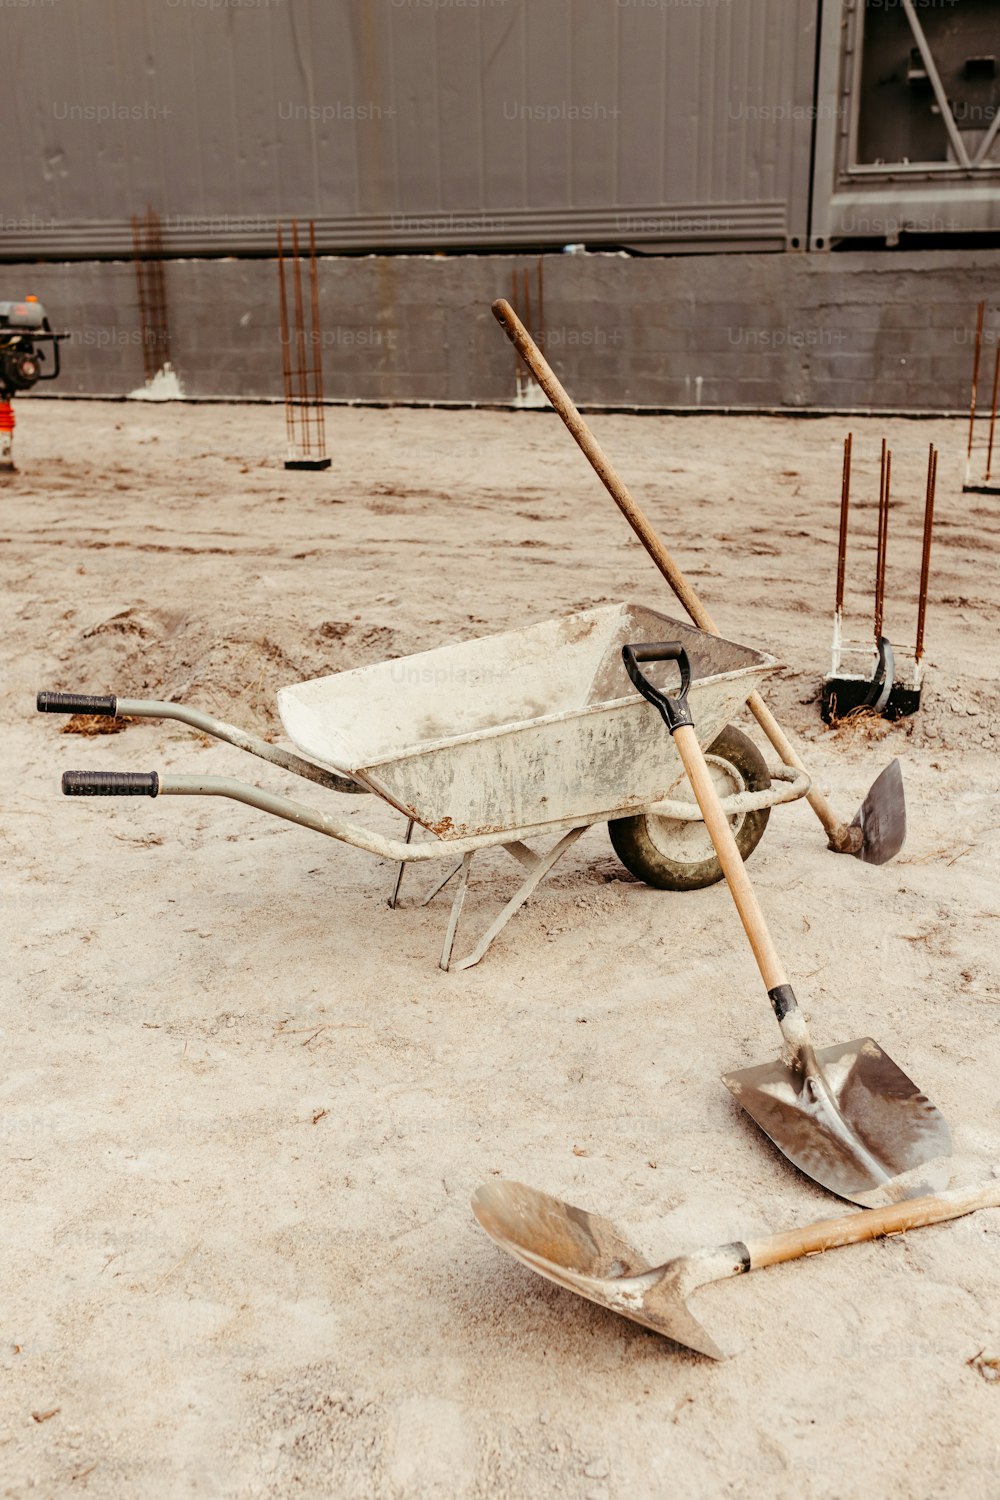 a wheelbarrow, shovels, and shovels are laying on the ground